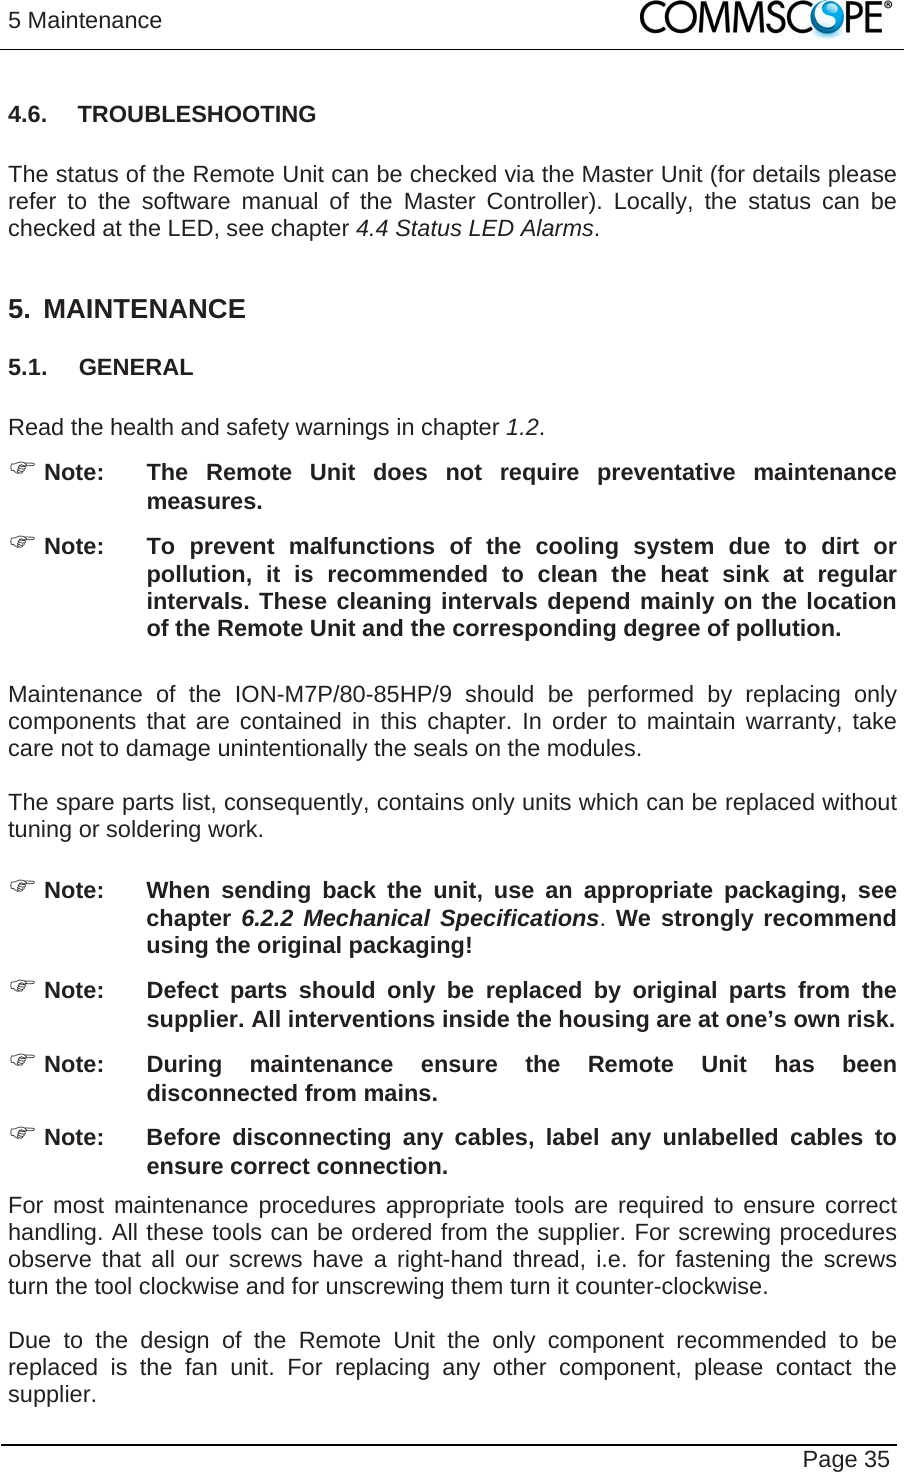 5 Maintenance   Page 35 4.6. TROUBLESHOOTING  The status of the Remote Unit can be checked via the Master Unit (for details please refer to the software manual of the Master Controller). Locally, the status can be checked at the LED, see chapter 4.4 Status LED Alarms.  5. MAINTENANCE 5.1. GENERAL  Read the health and safety warnings in chapter 1.2.  Note:  The Remote Unit does not require preventative maintenance measures.  Note:  To prevent malfunctions of the cooling system due to dirt or pollution, it is recommended to clean the heat sink at regular intervals. These cleaning intervals depend mainly on the location of the Remote Unit and the corresponding degree of pollution.  Maintenance of the ION-M7P/80-85HP/9 should be performed by replacing only components that are contained in this chapter. In order to maintain warranty, take care not to damage unintentionally the seals on the modules.  The spare parts list, consequently, contains only units which can be replaced without tuning or soldering work.   Note:  When sending back the unit, use an appropriate packaging, see chapter 6.2.2 Mechanical Specifications. We strongly recommend using the original packaging!  Note:  Defect parts should only be replaced by original parts from the supplier. All interventions inside the housing are at one’s own risk.  Note:  During maintenance ensure the Remote Unit has been disconnected from mains.  Note:  Before disconnecting any cables, label any unlabelled cables to ensure correct connection. For most maintenance procedures appropriate tools are required to ensure correct handling. All these tools can be ordered from the supplier. For screwing procedures observe that all our screws have a right-hand thread, i.e. for fastening the screws turn the tool clockwise and for unscrewing them turn it counter-clockwise.  Due to the design of the Remote Unit the only component recommended to be replaced is the fan unit. For replacing any other component, please contact the supplier.  